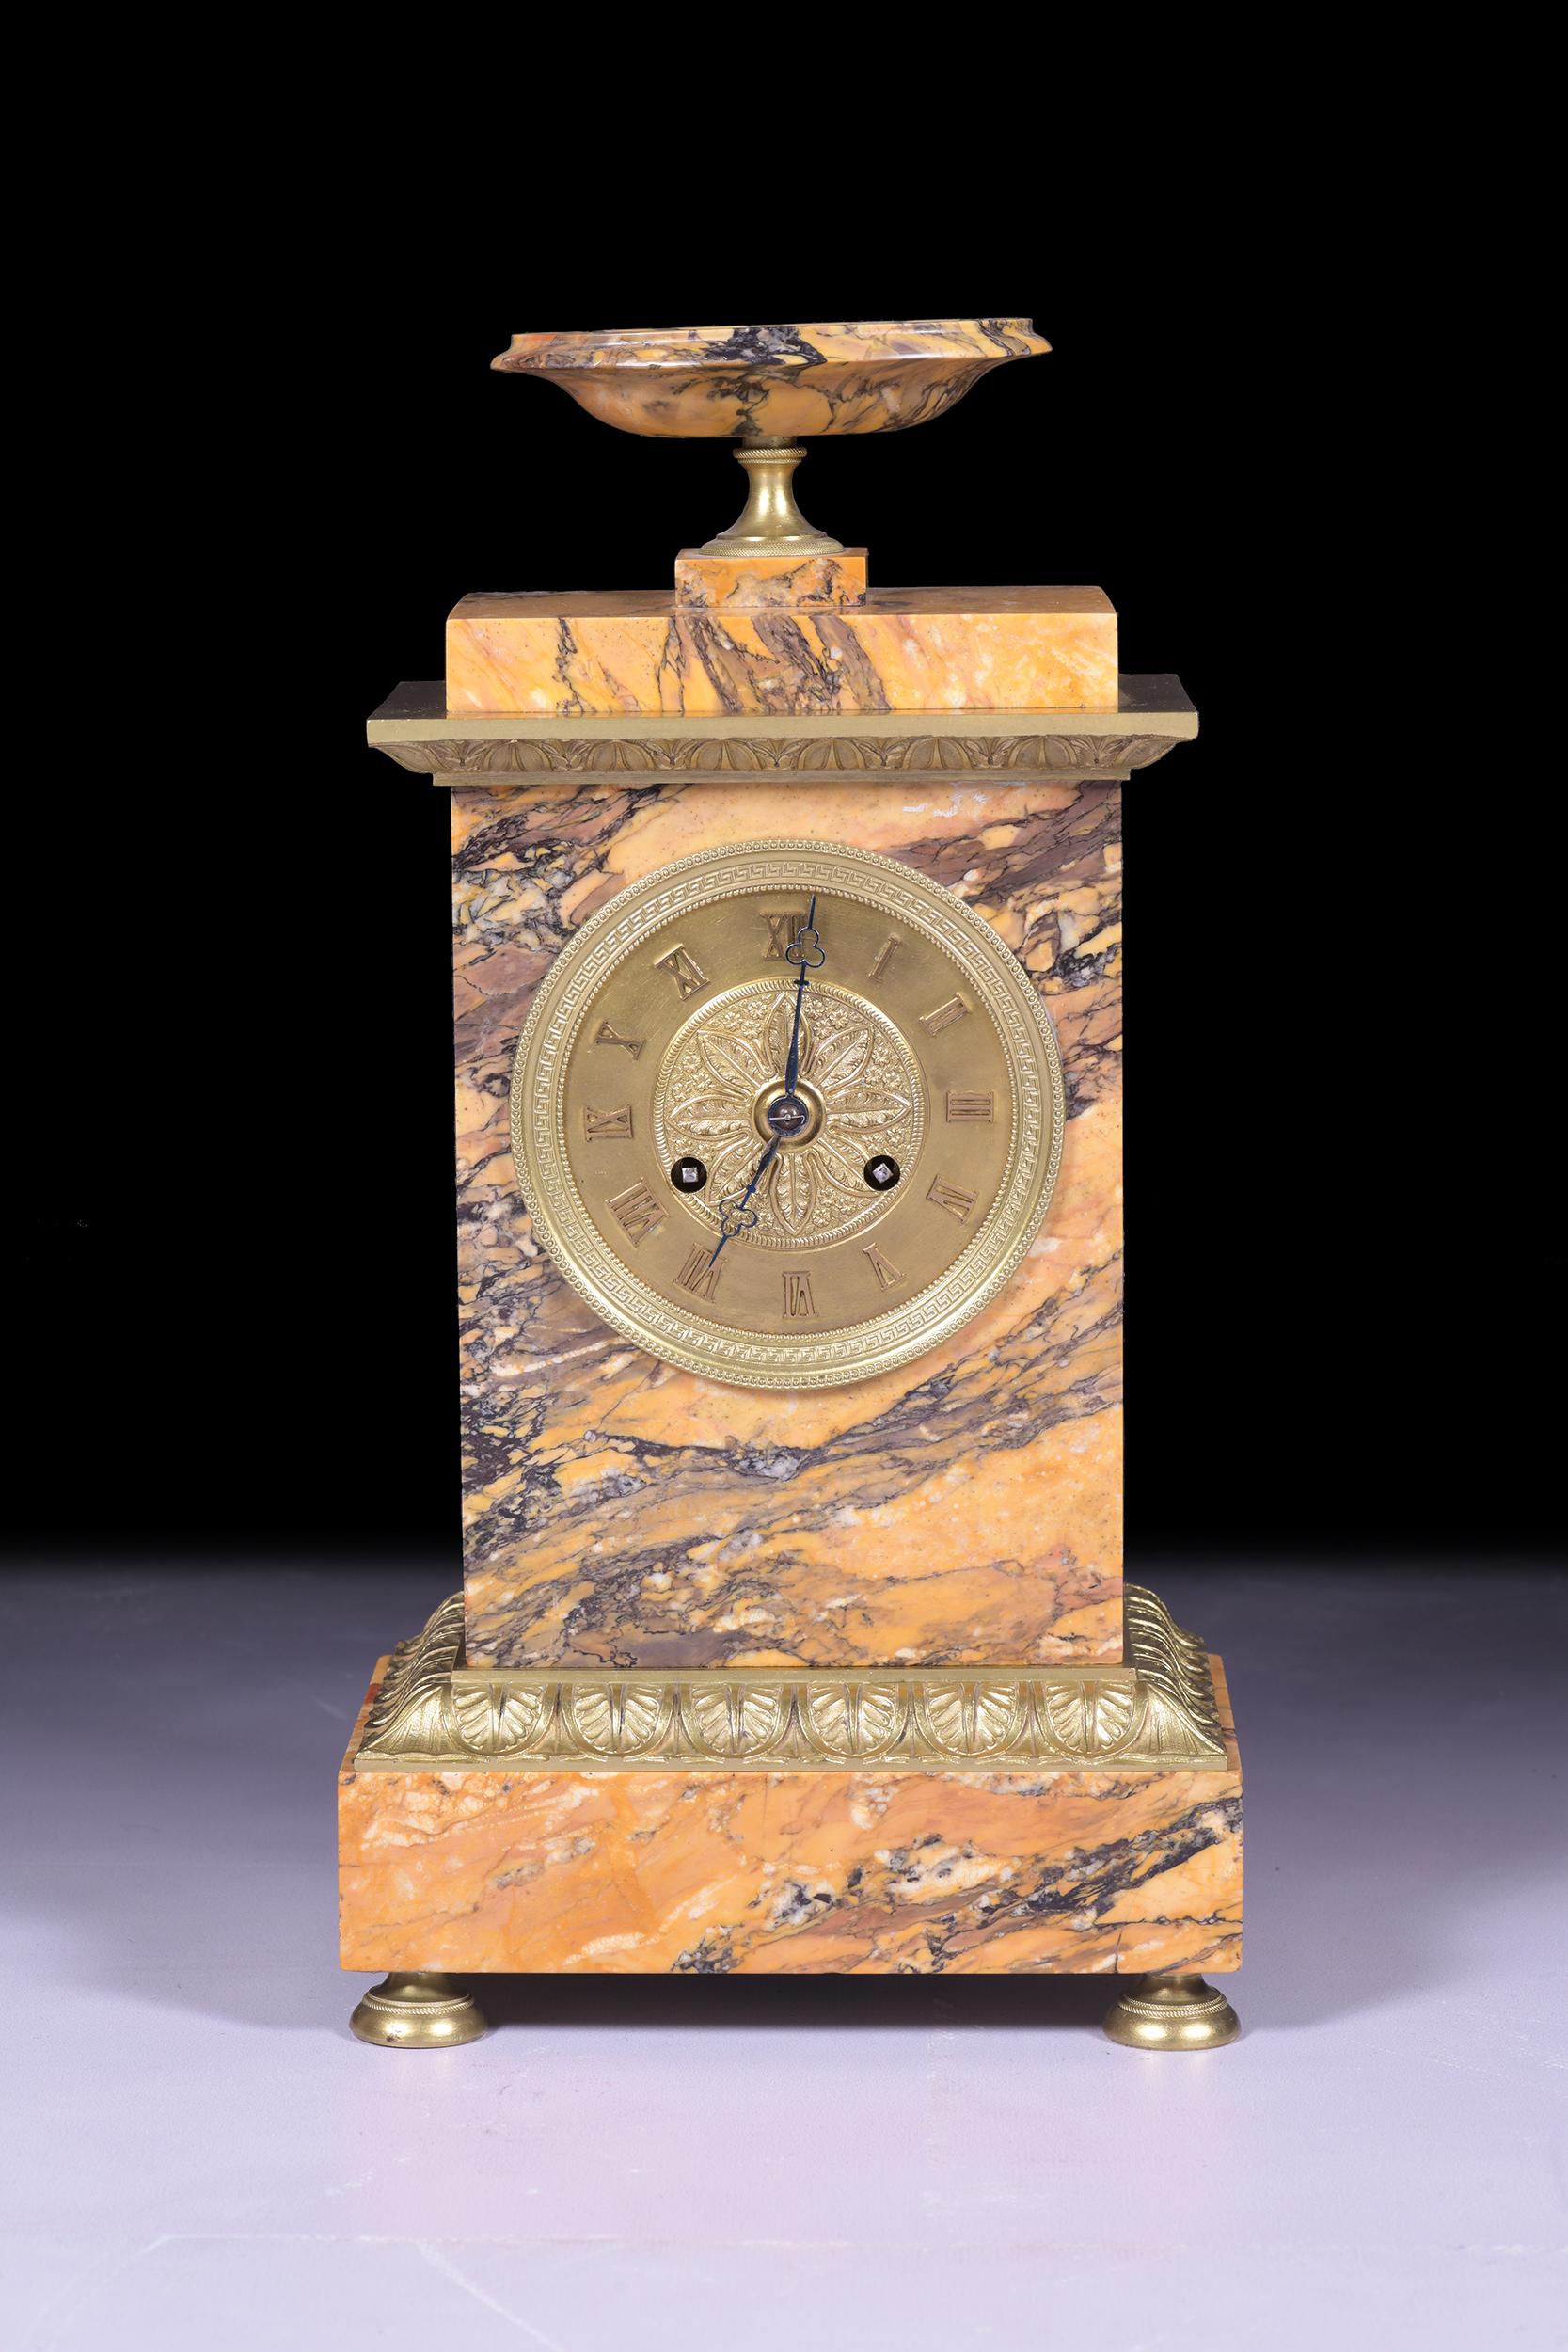 An exceptional quality early 19th century Sienna marble and ormolu mantle clock, the sienna marble case surmounted by an urn, raised on ormolu bun feet and a rectangular plinth steeped base with foliate cast border, the gilt dial is surrounded by a